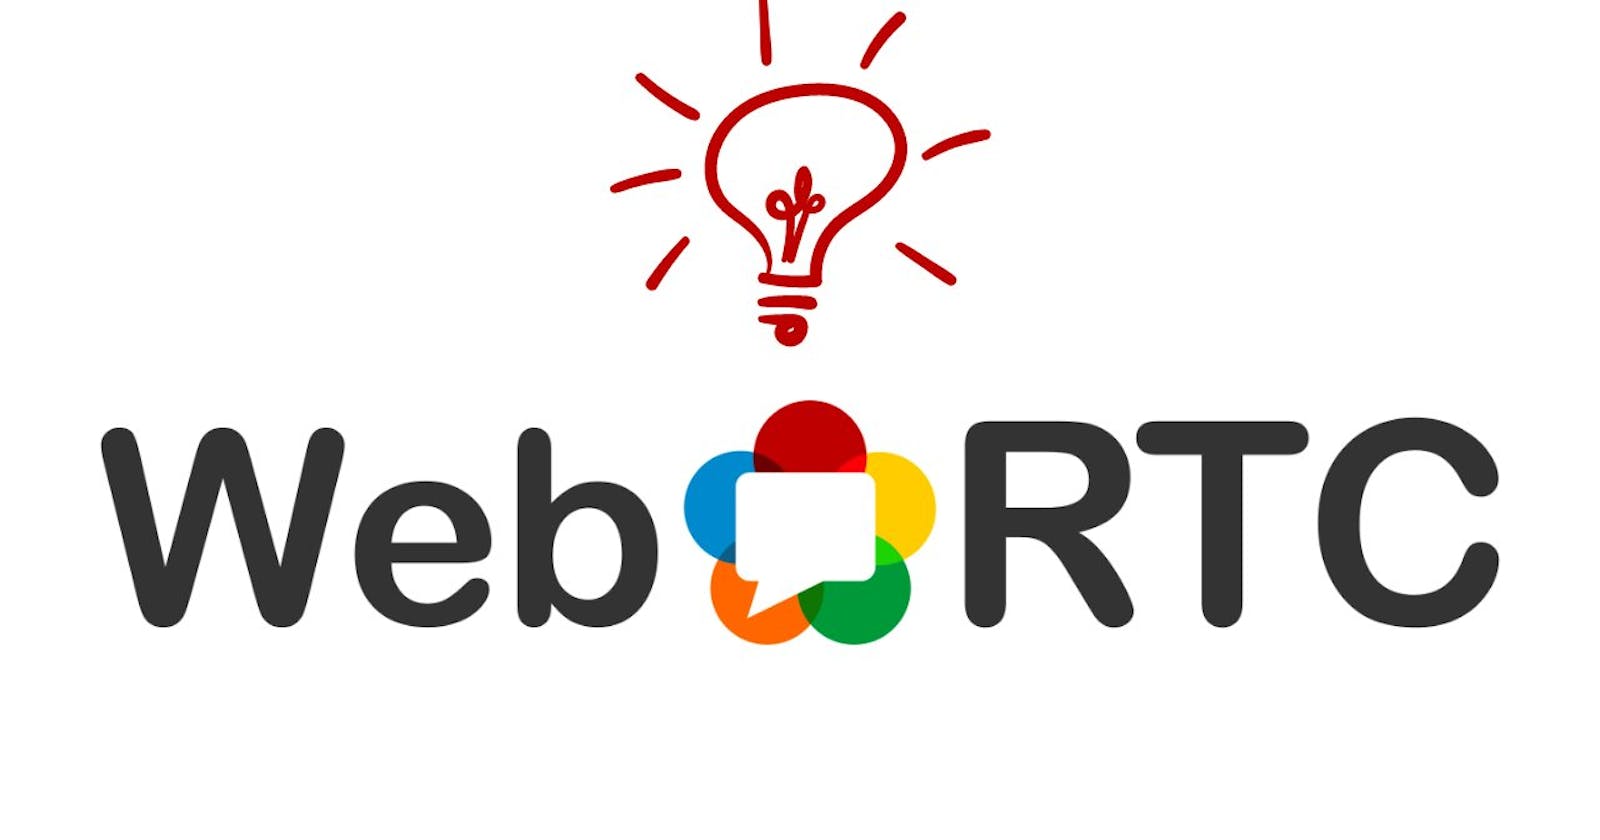 5 WebRTC Ideas For Your Next Project